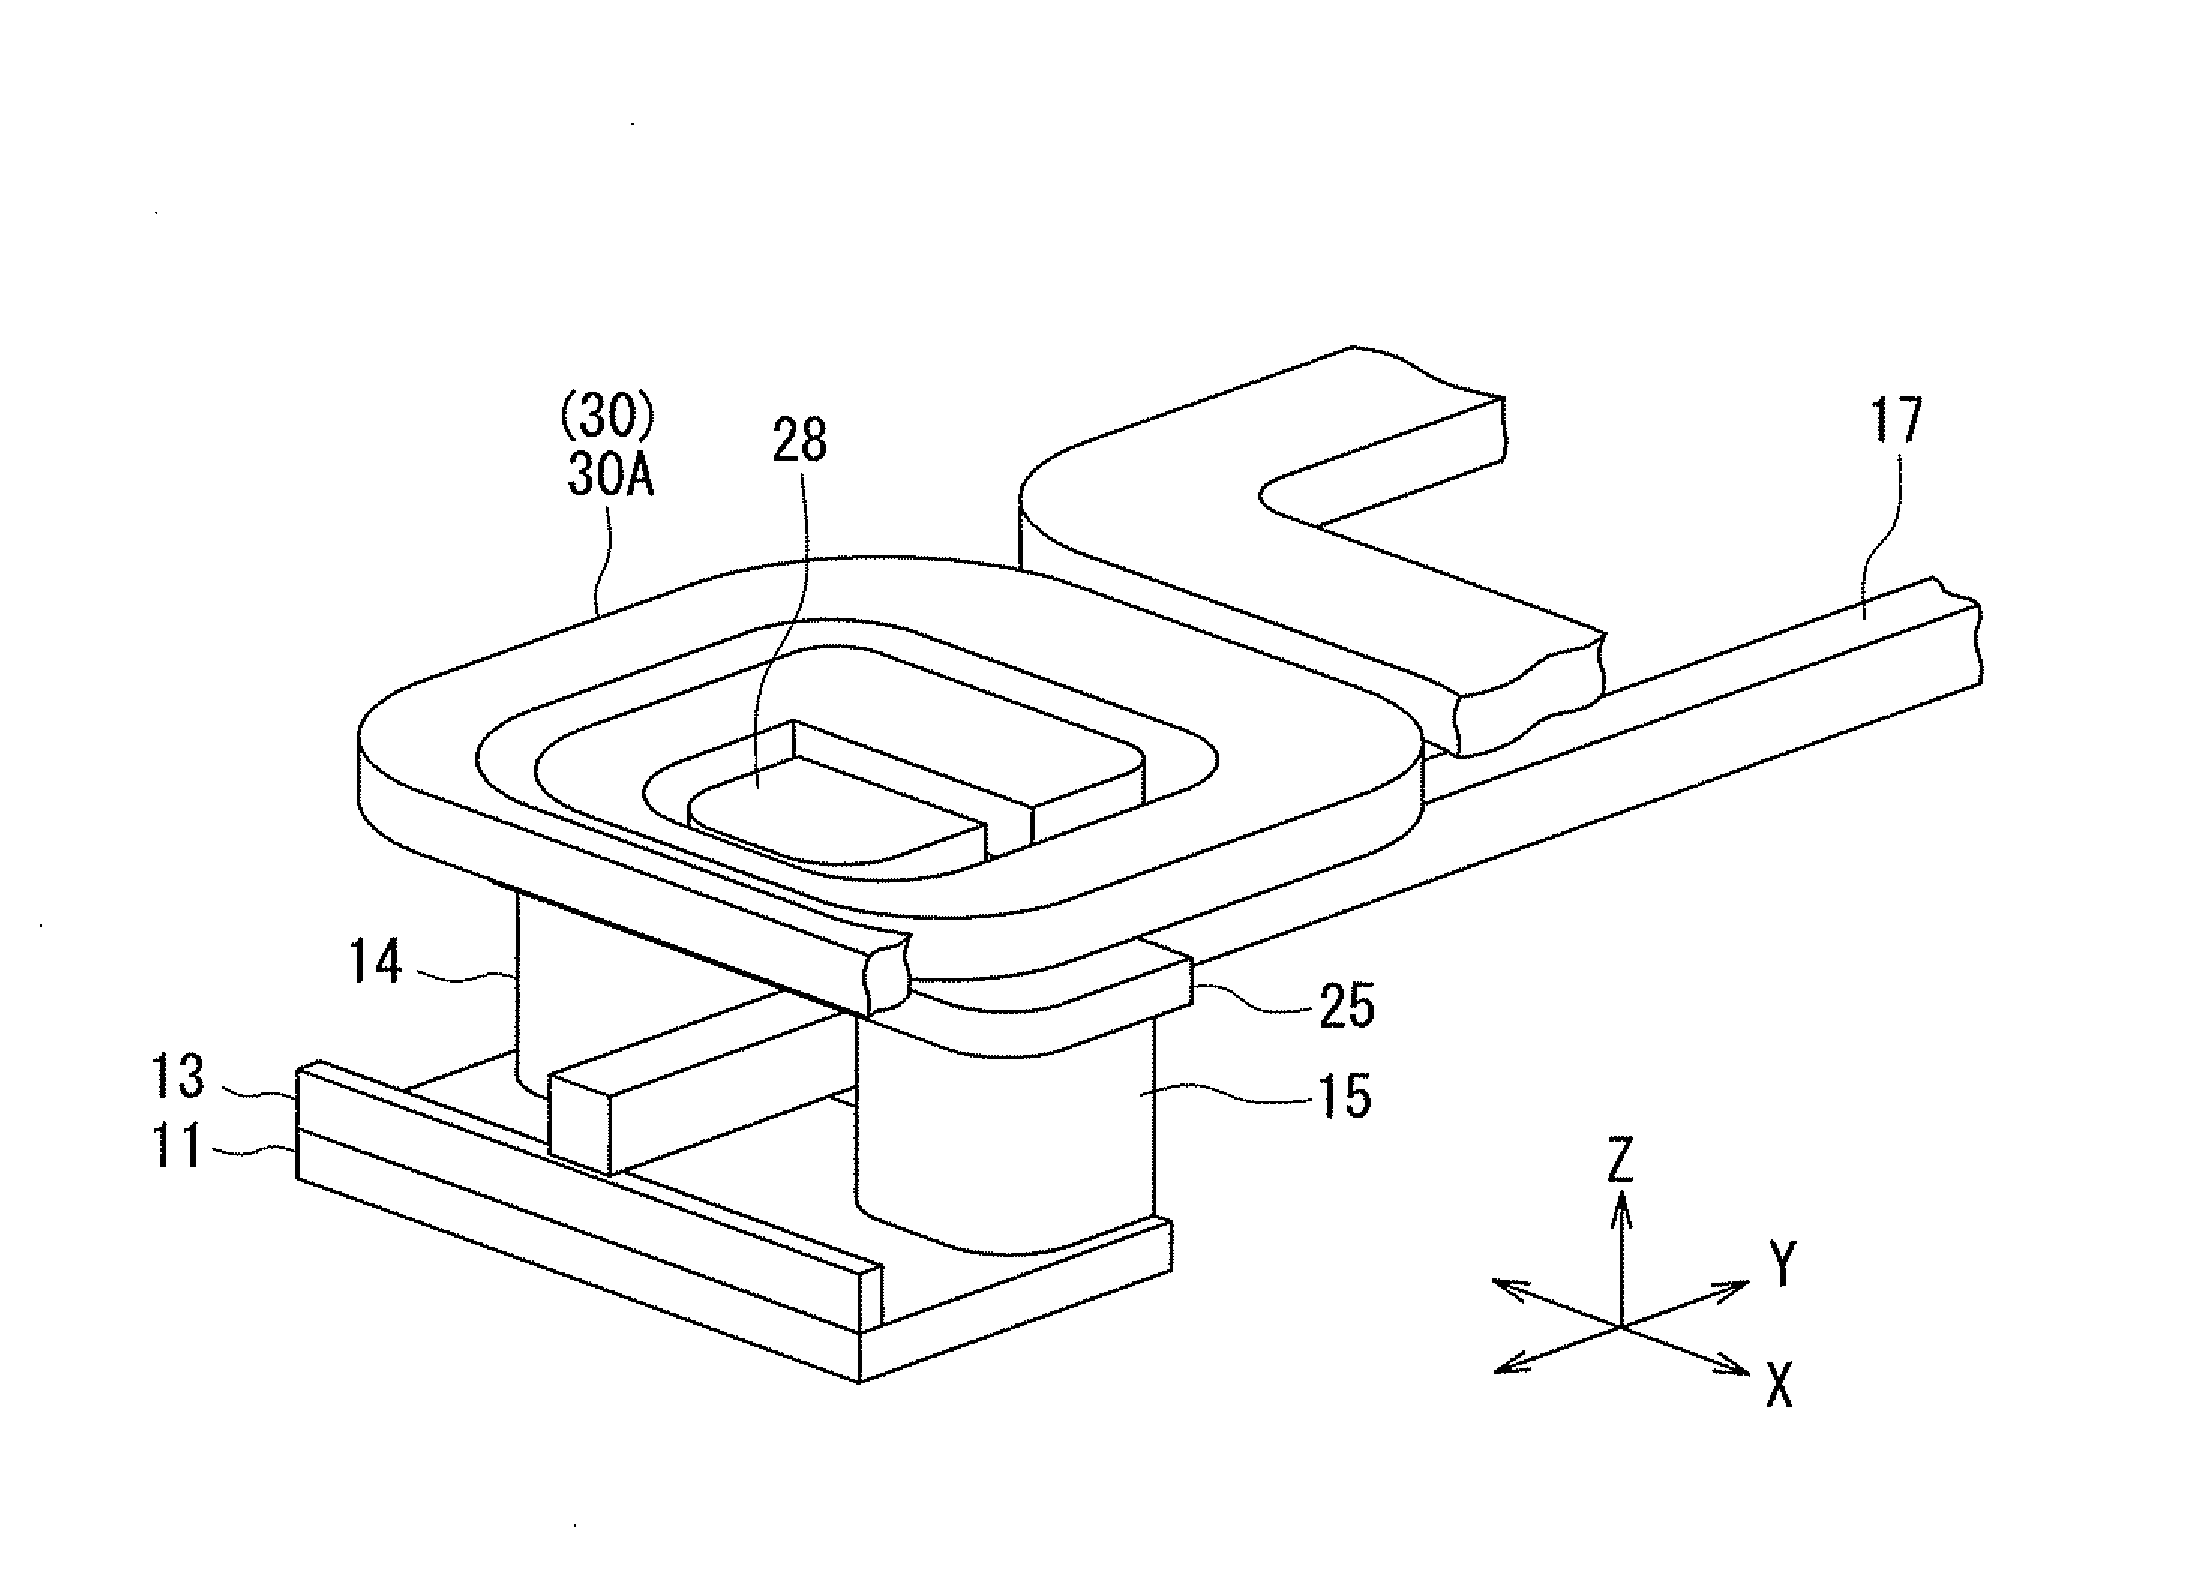 Thermally-assisted magnetic recording head having a waveguide and a return path section